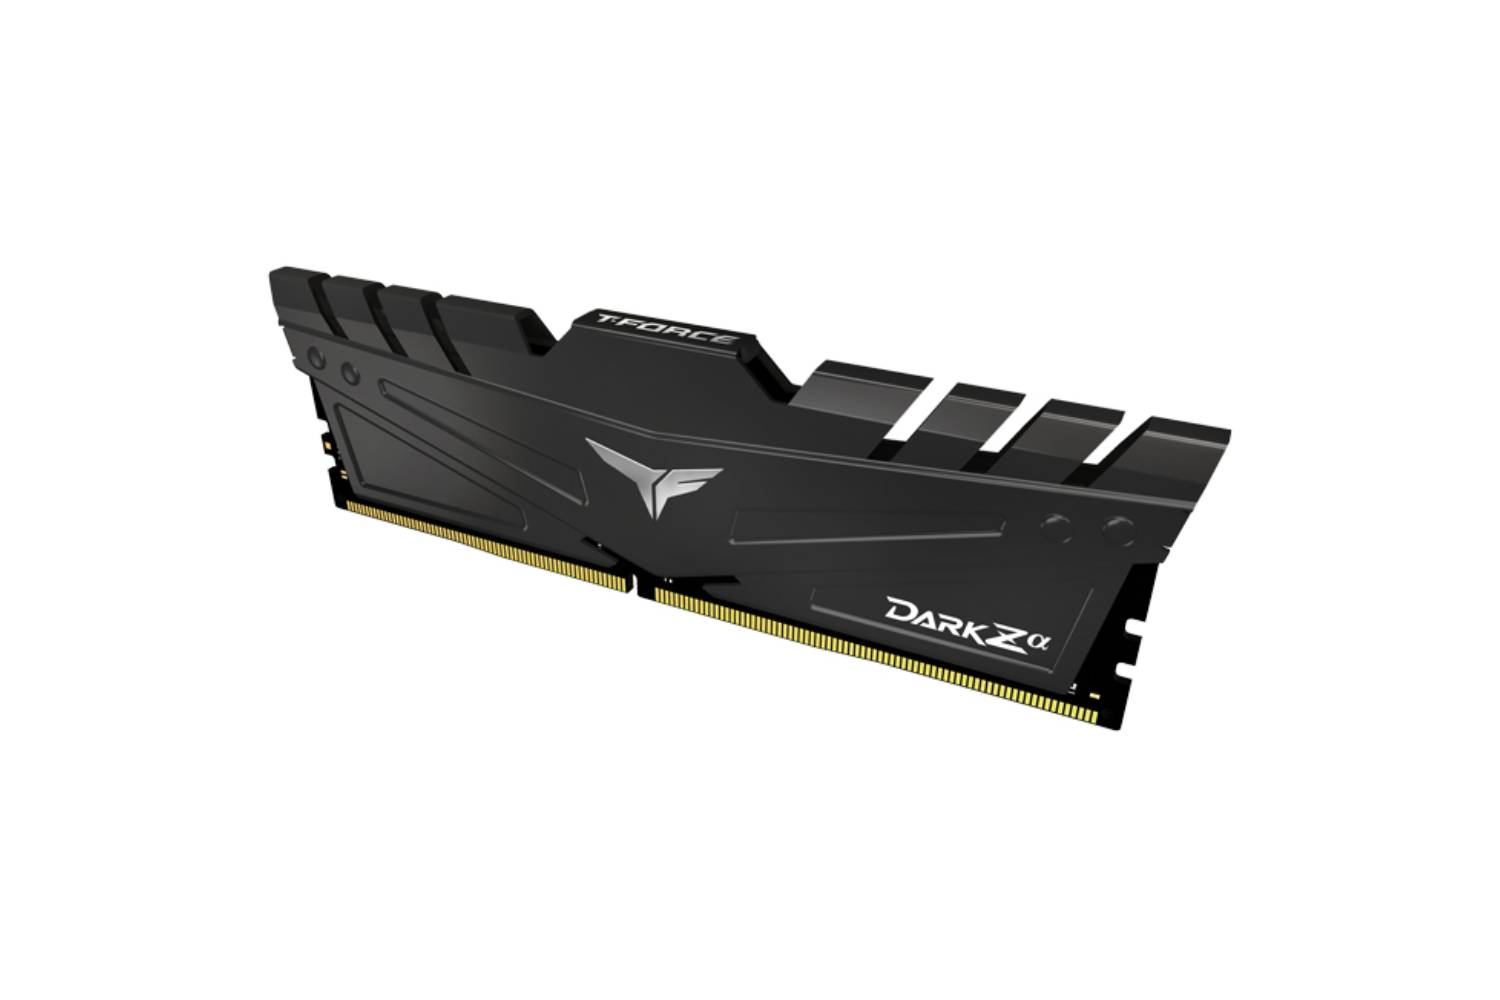 T-force DARK Zα DDR4 GAMING MEMORY (FOR AMD) (16GB x 2) 32GB Gaming Memory